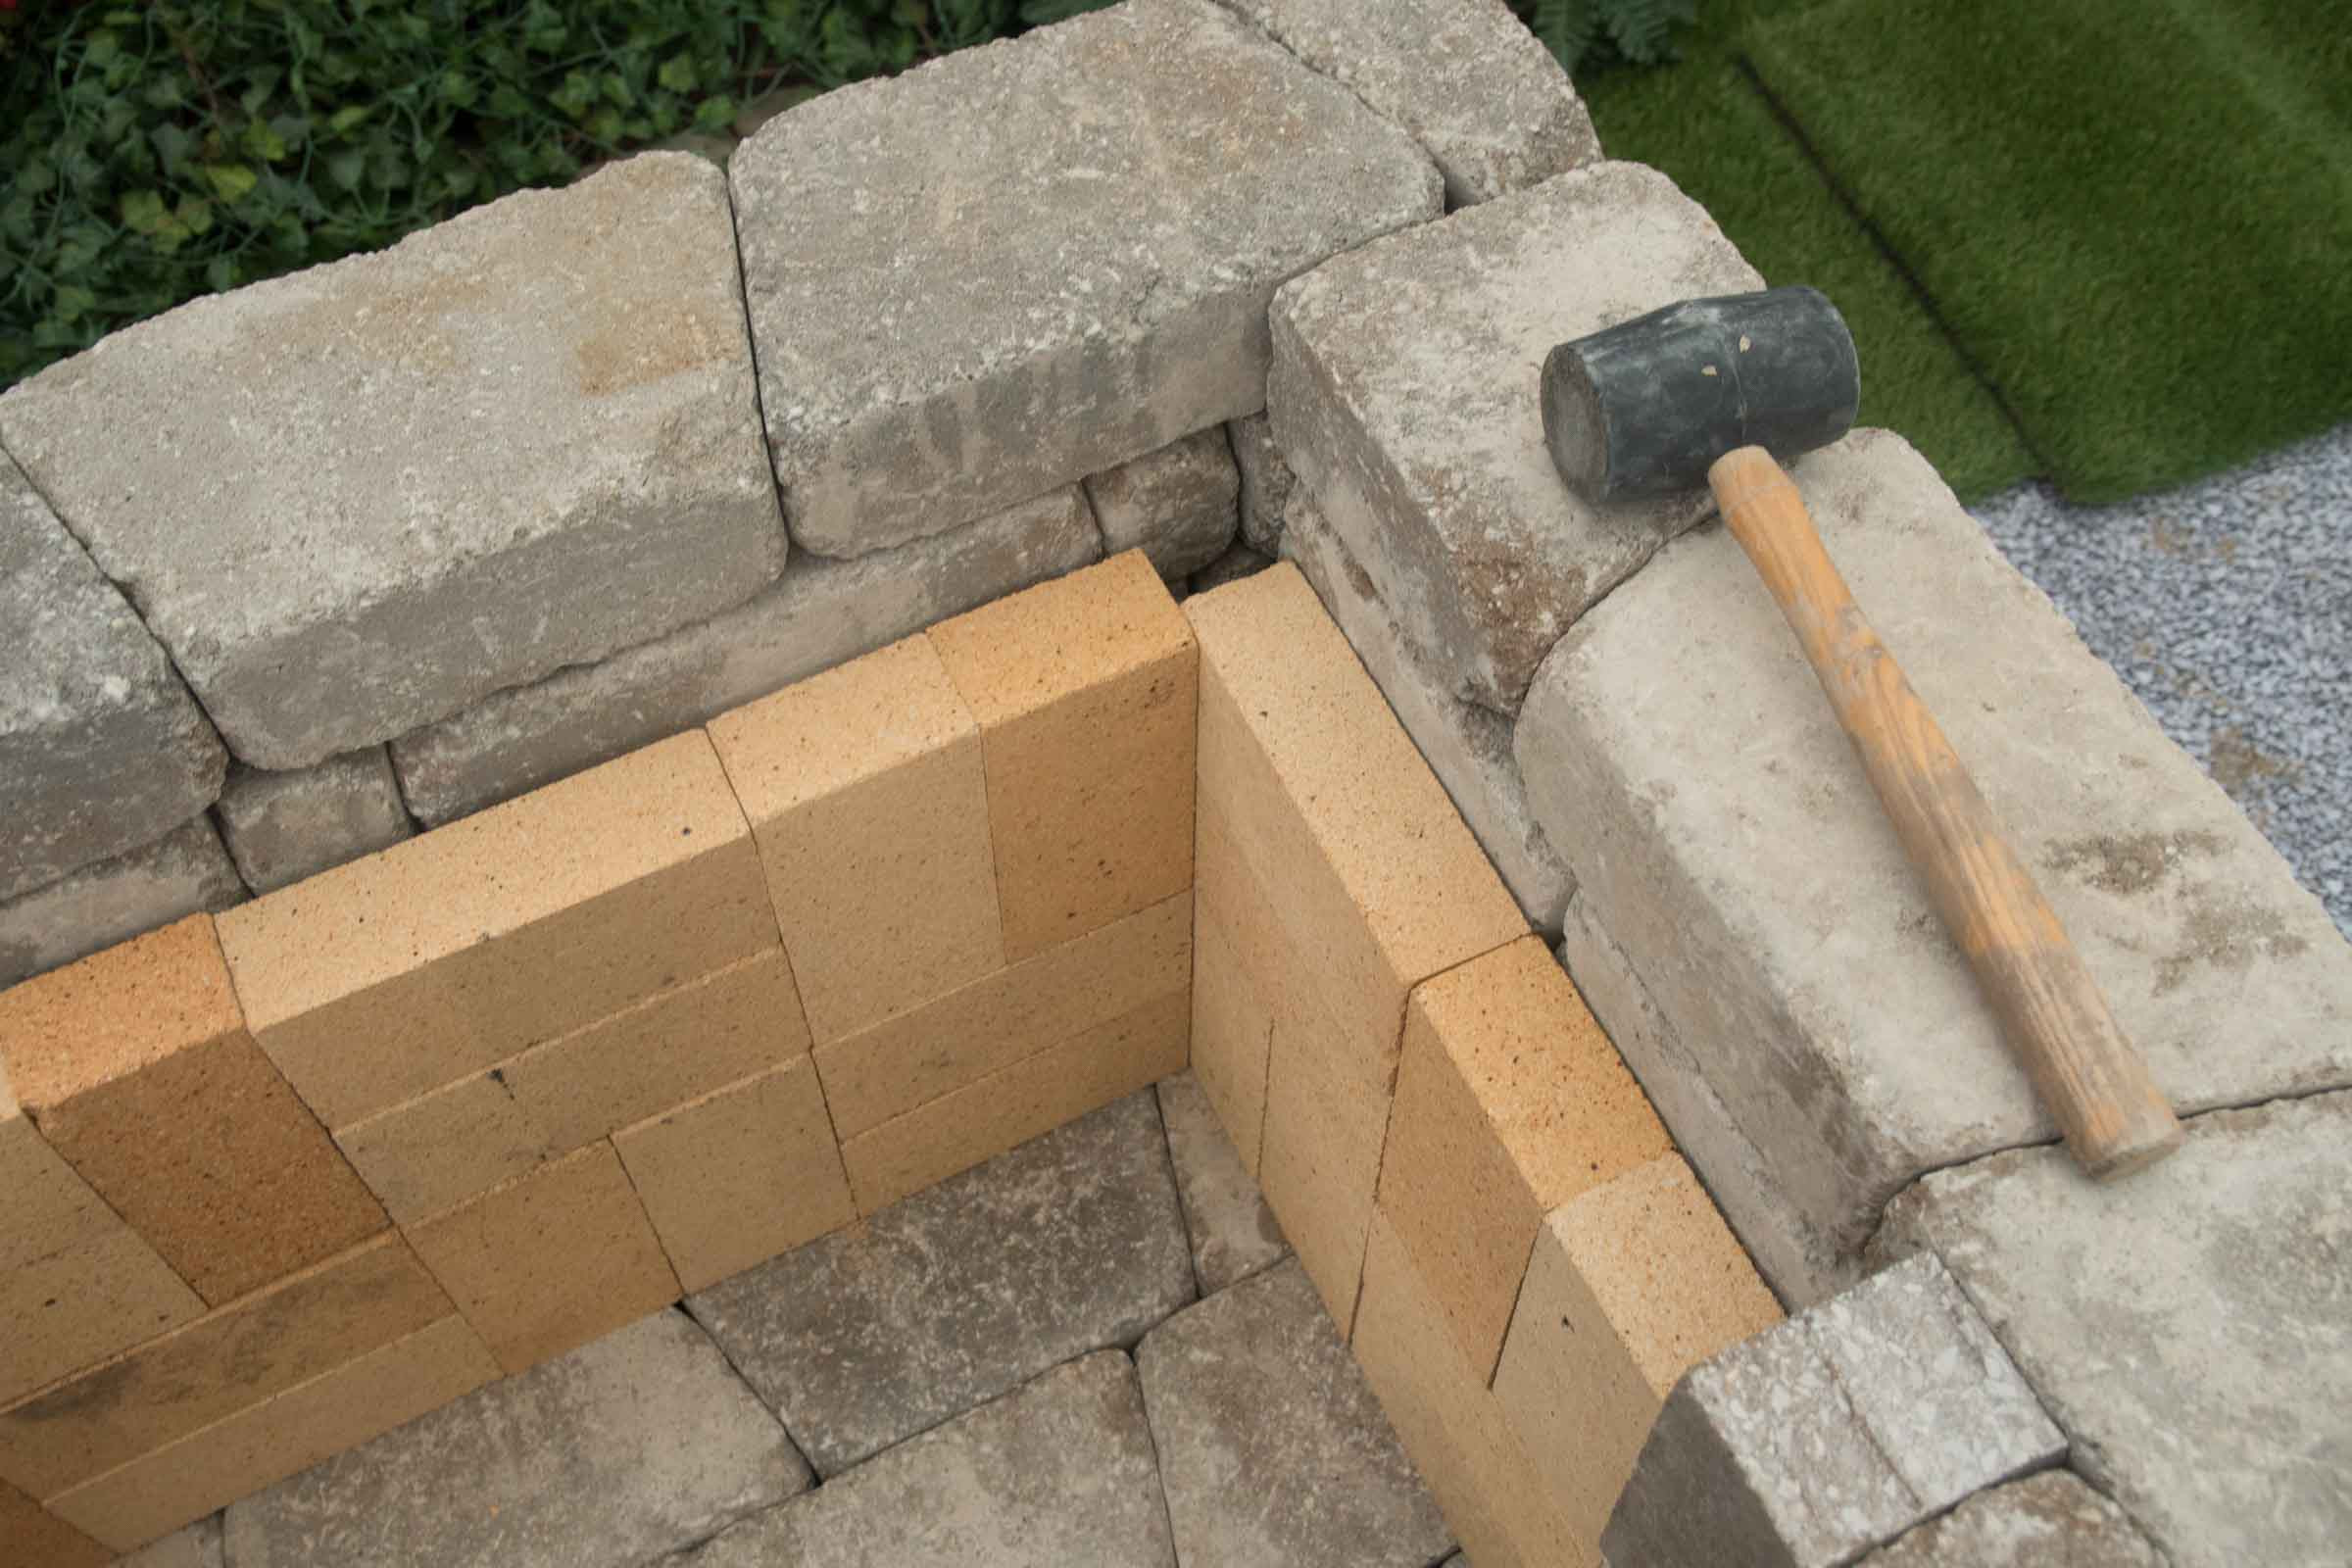 Outdoor Fireplace DIY
 DIY Outdoor Fireplace Kit "Fremont" makes hardscaping